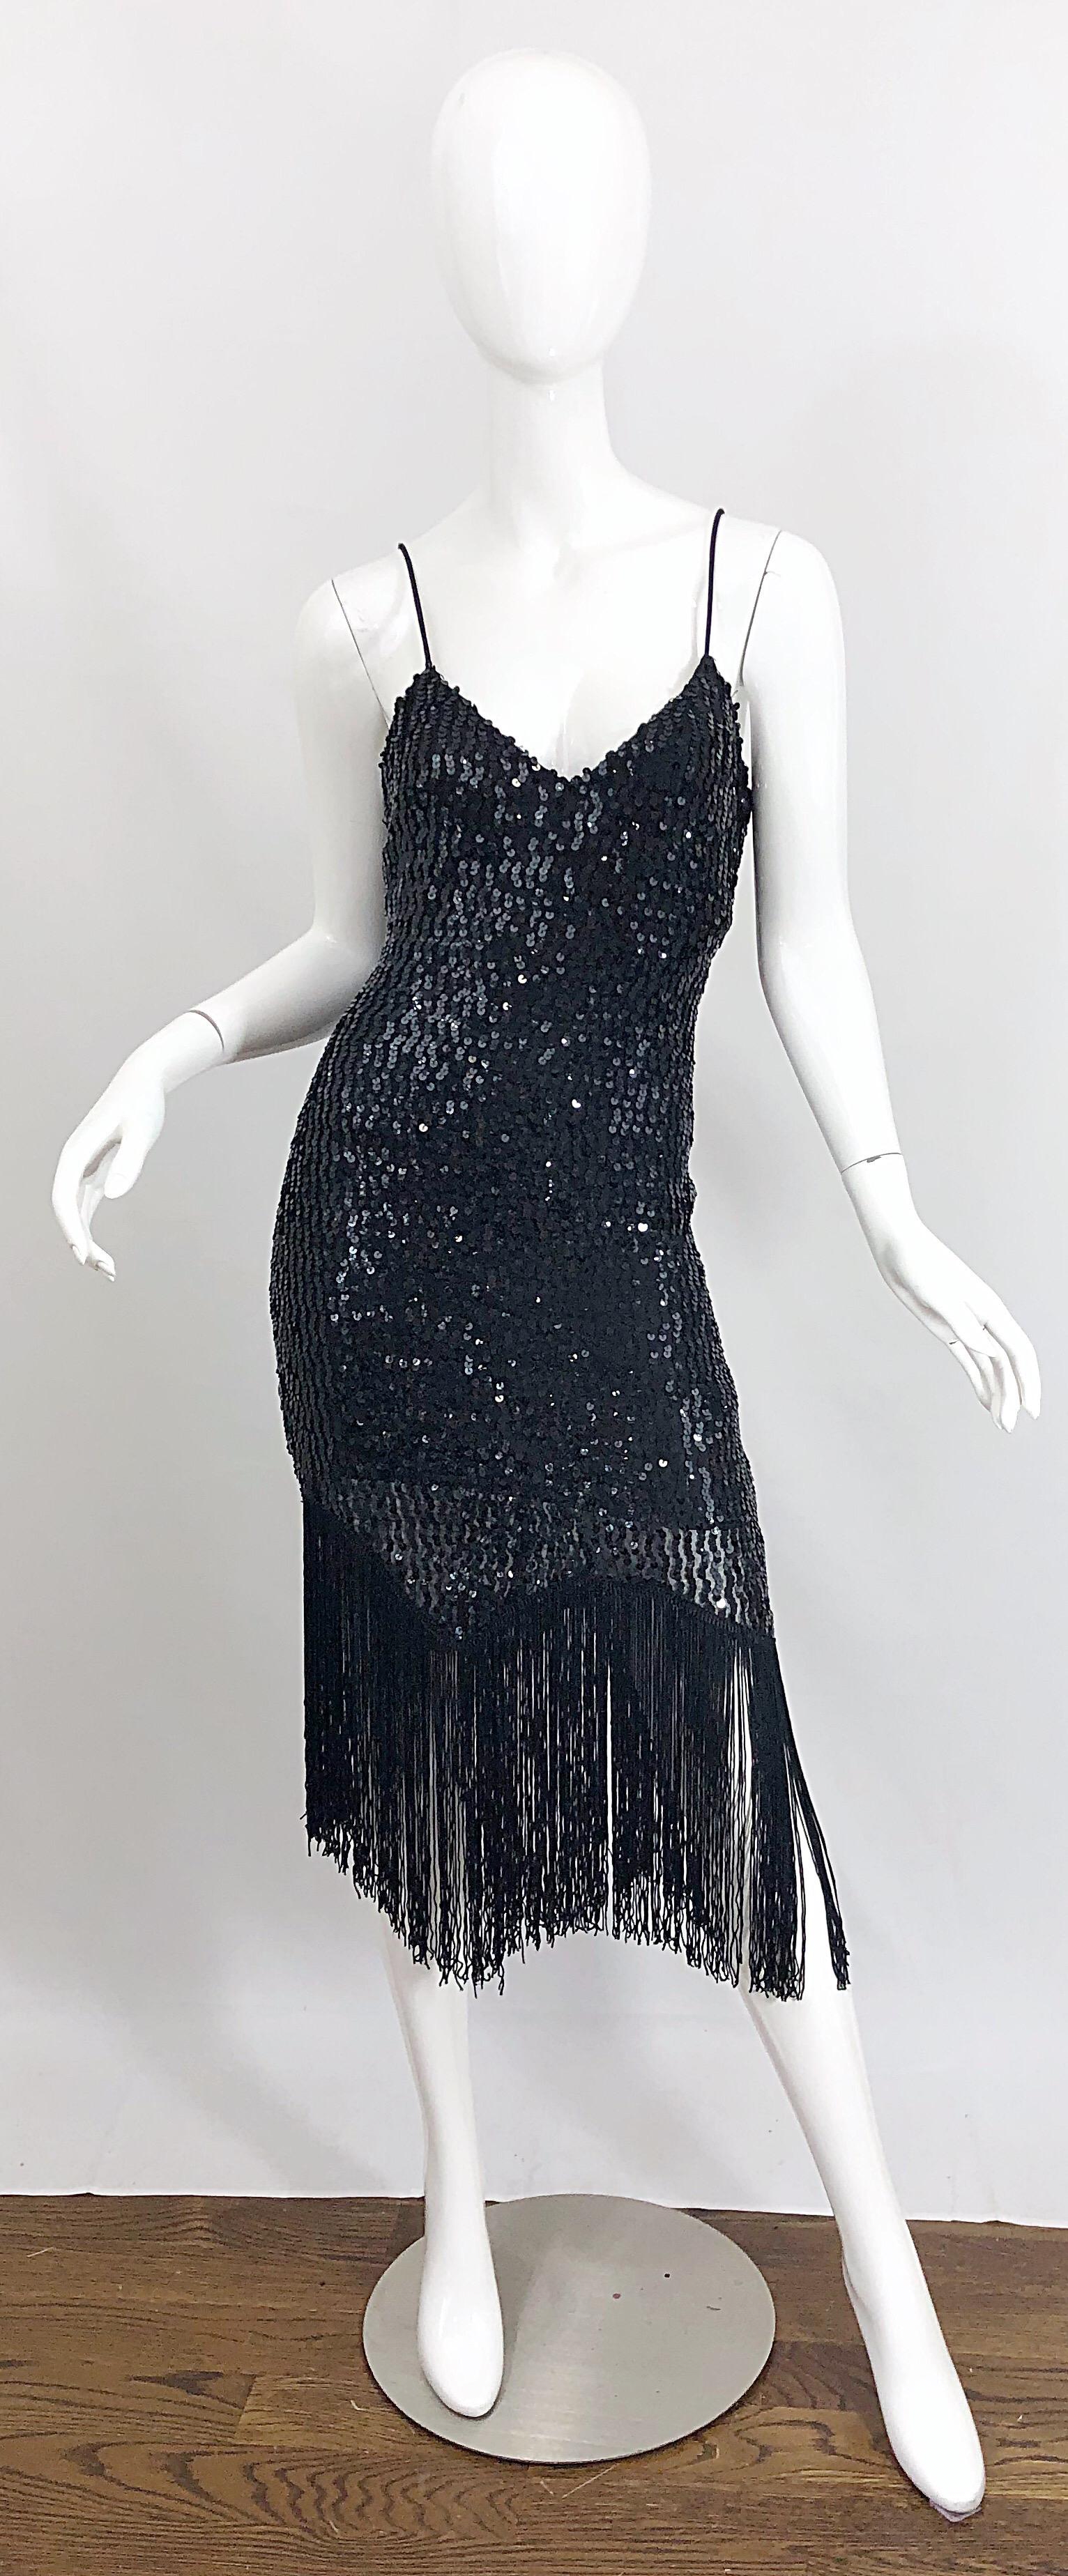 New with tags 70s does 20s JOY STEVENS black sequined flapper style fringed dress! Features thousands of hand-sewn black sequins throughout. Fringe hem makes this dress perfect for dancing. Figure flattering fit that features some stretch. Hidden